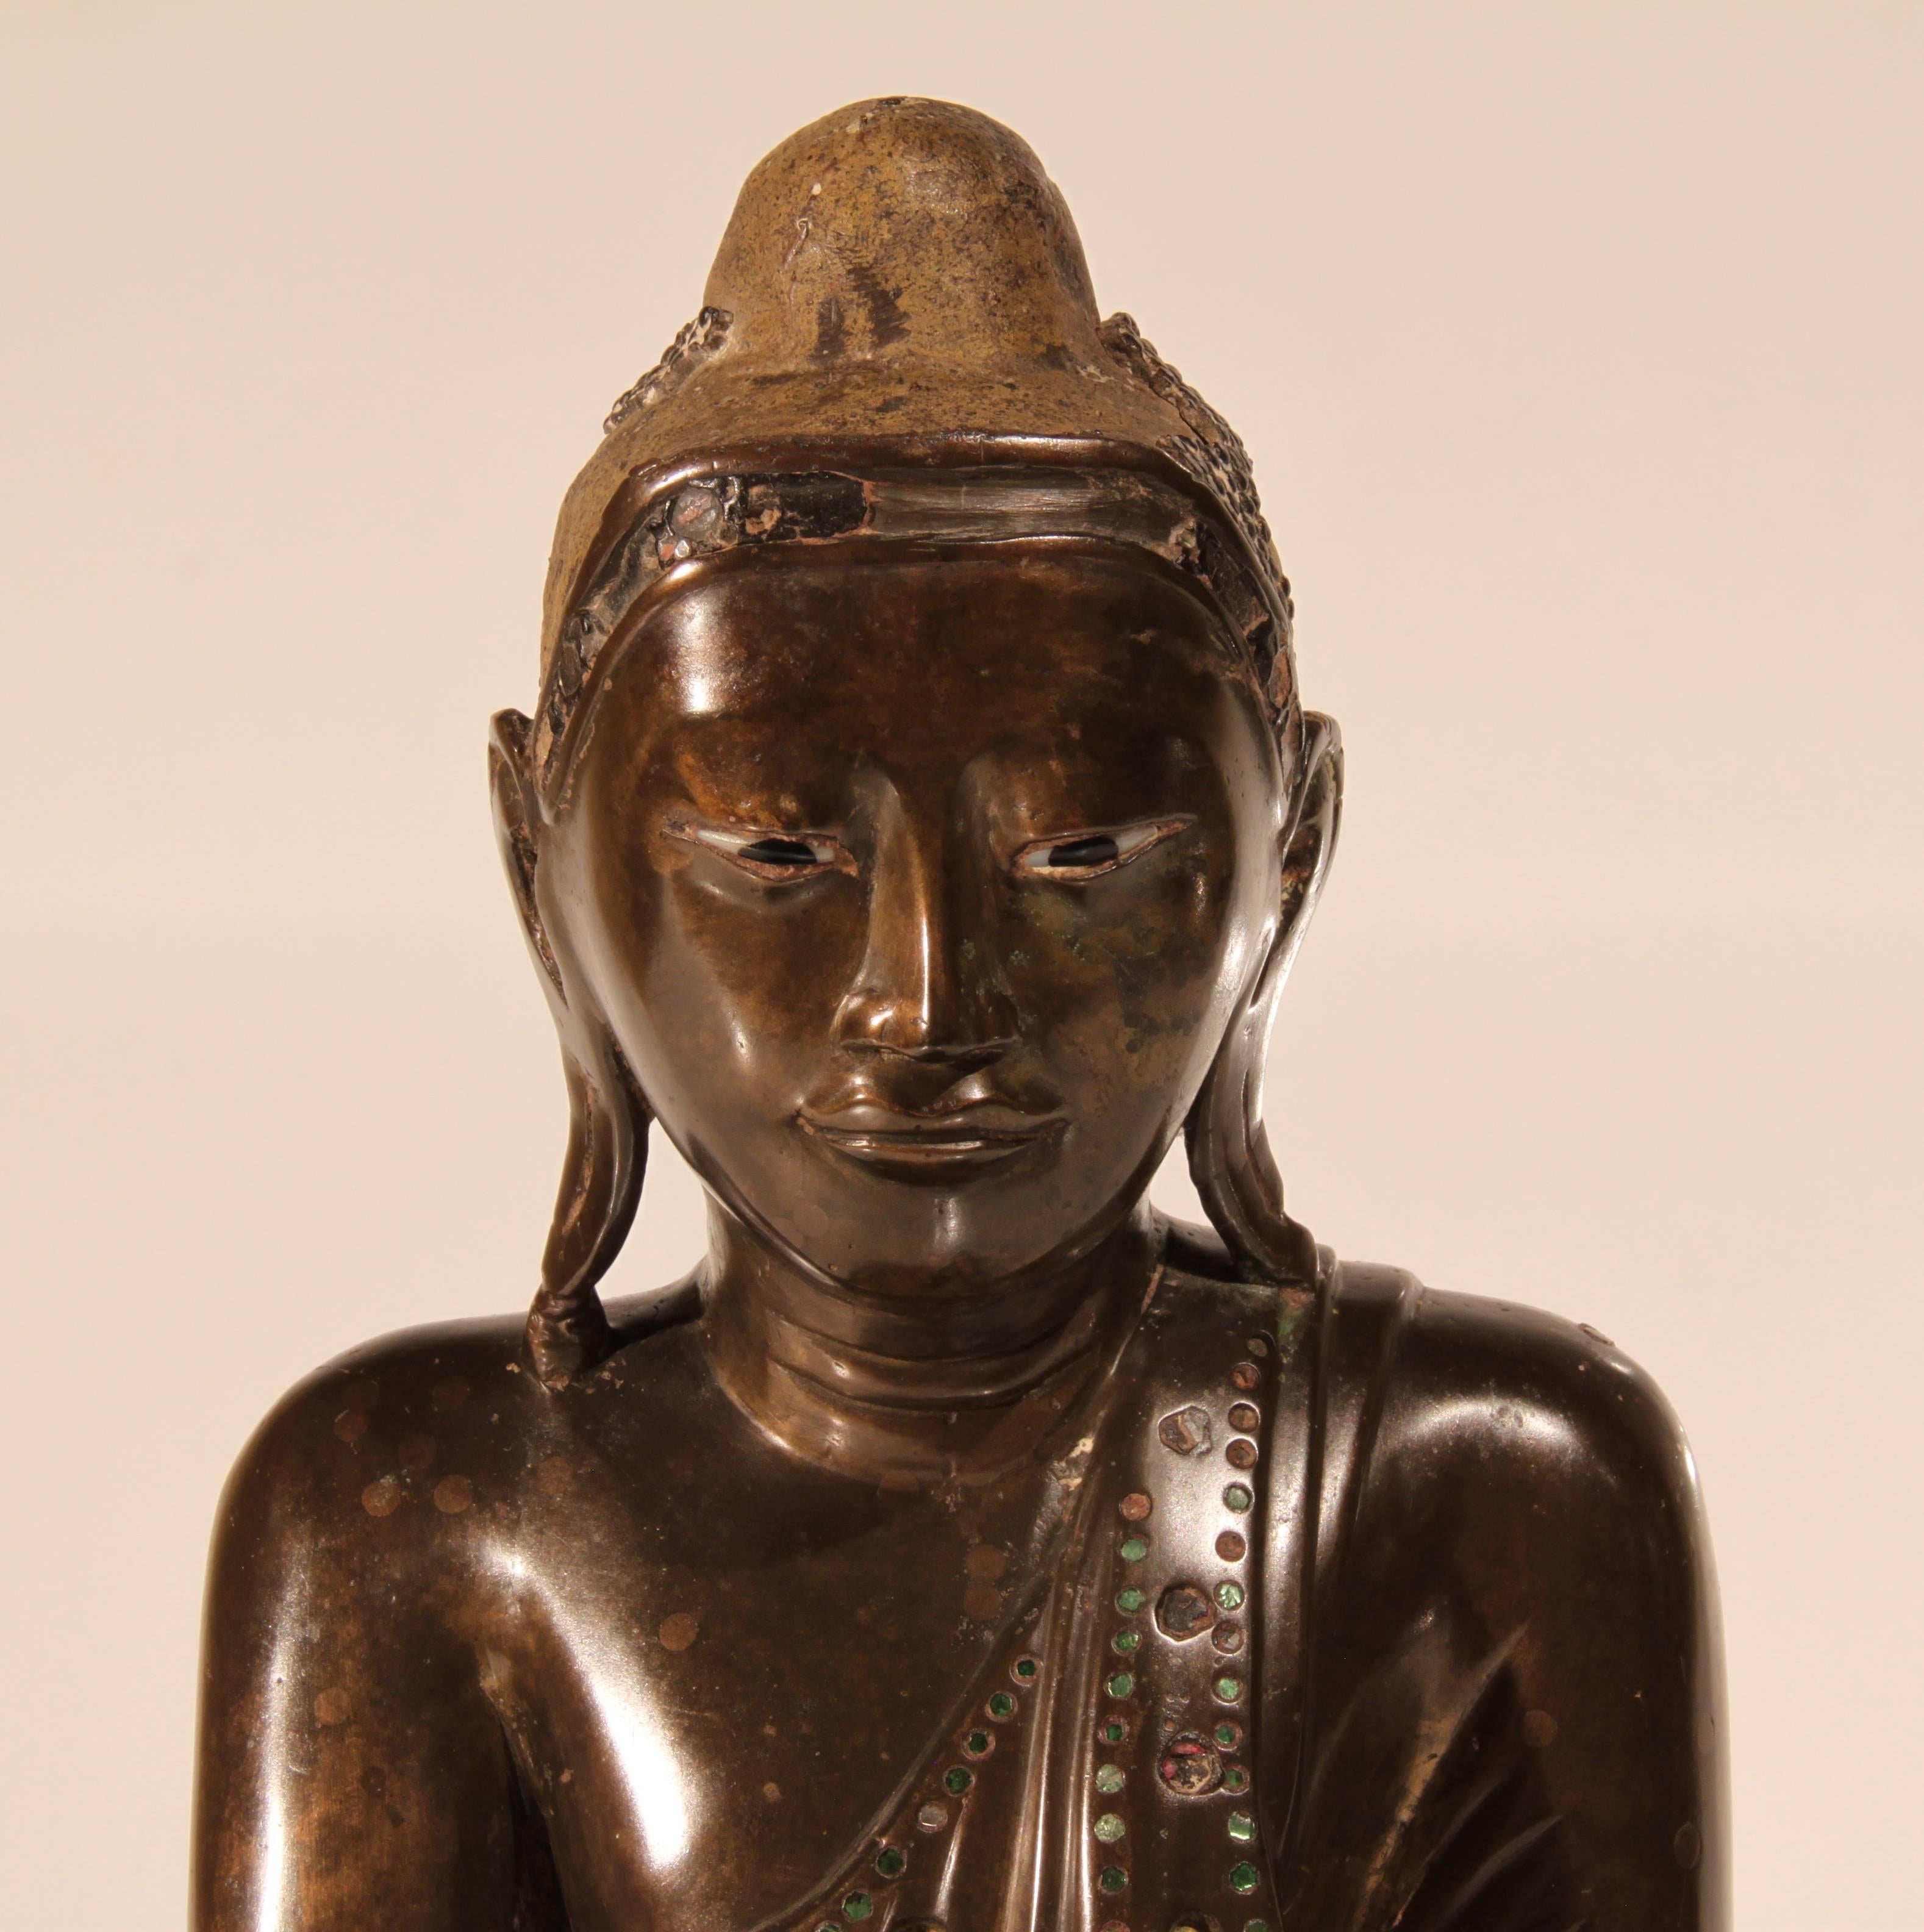 A mid-19th century Mandalay period Thai bronze Buddha inlaid with green glass and having enamel inlaid eyes. The head dress once lacquered and gilded, now with traces of lacquer. The left hand cast separately and held in place with lead. Many